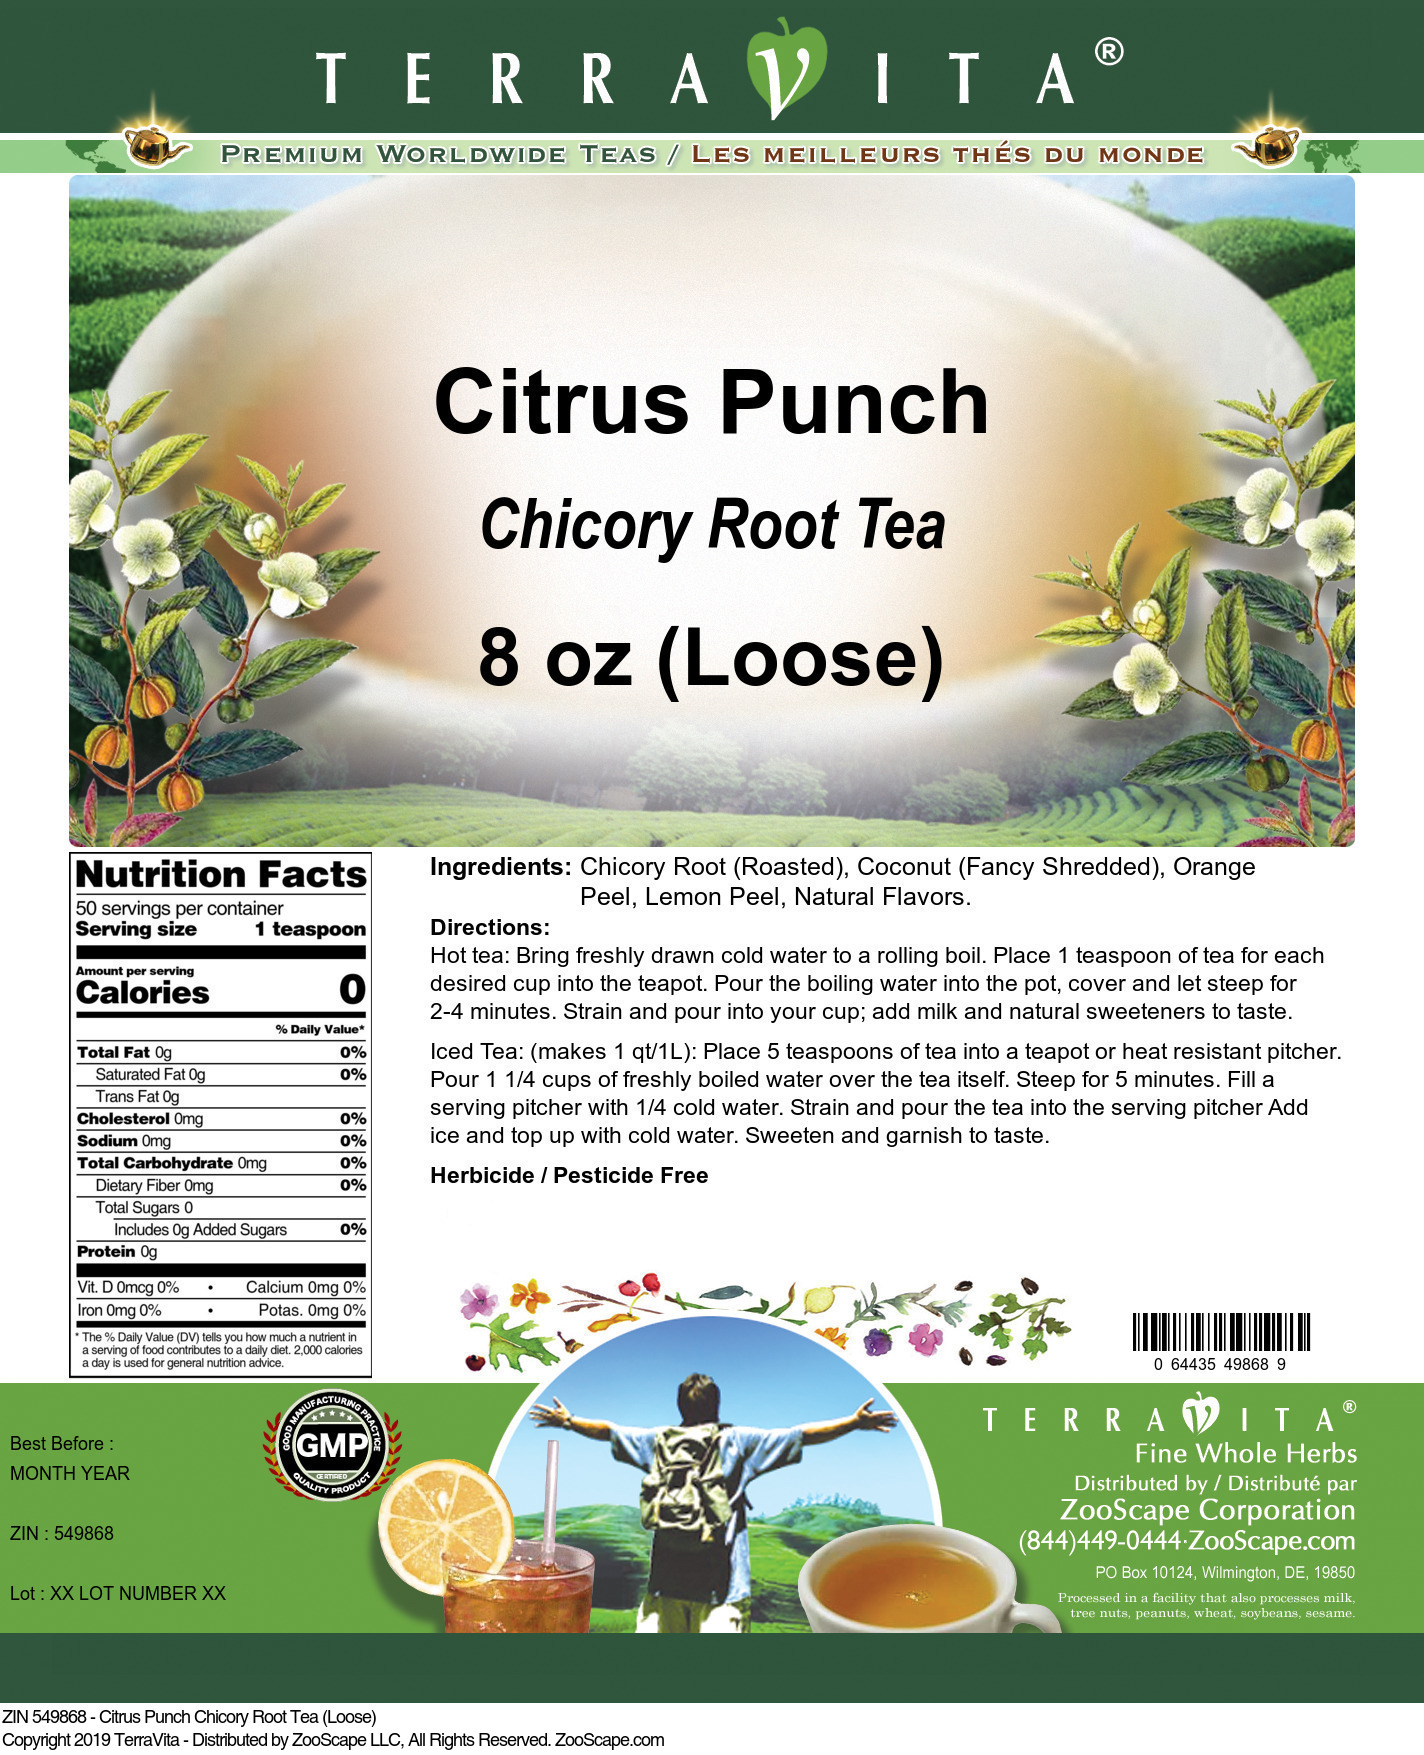 Citrus Punch Chicory Root Tea (Loose) - Label